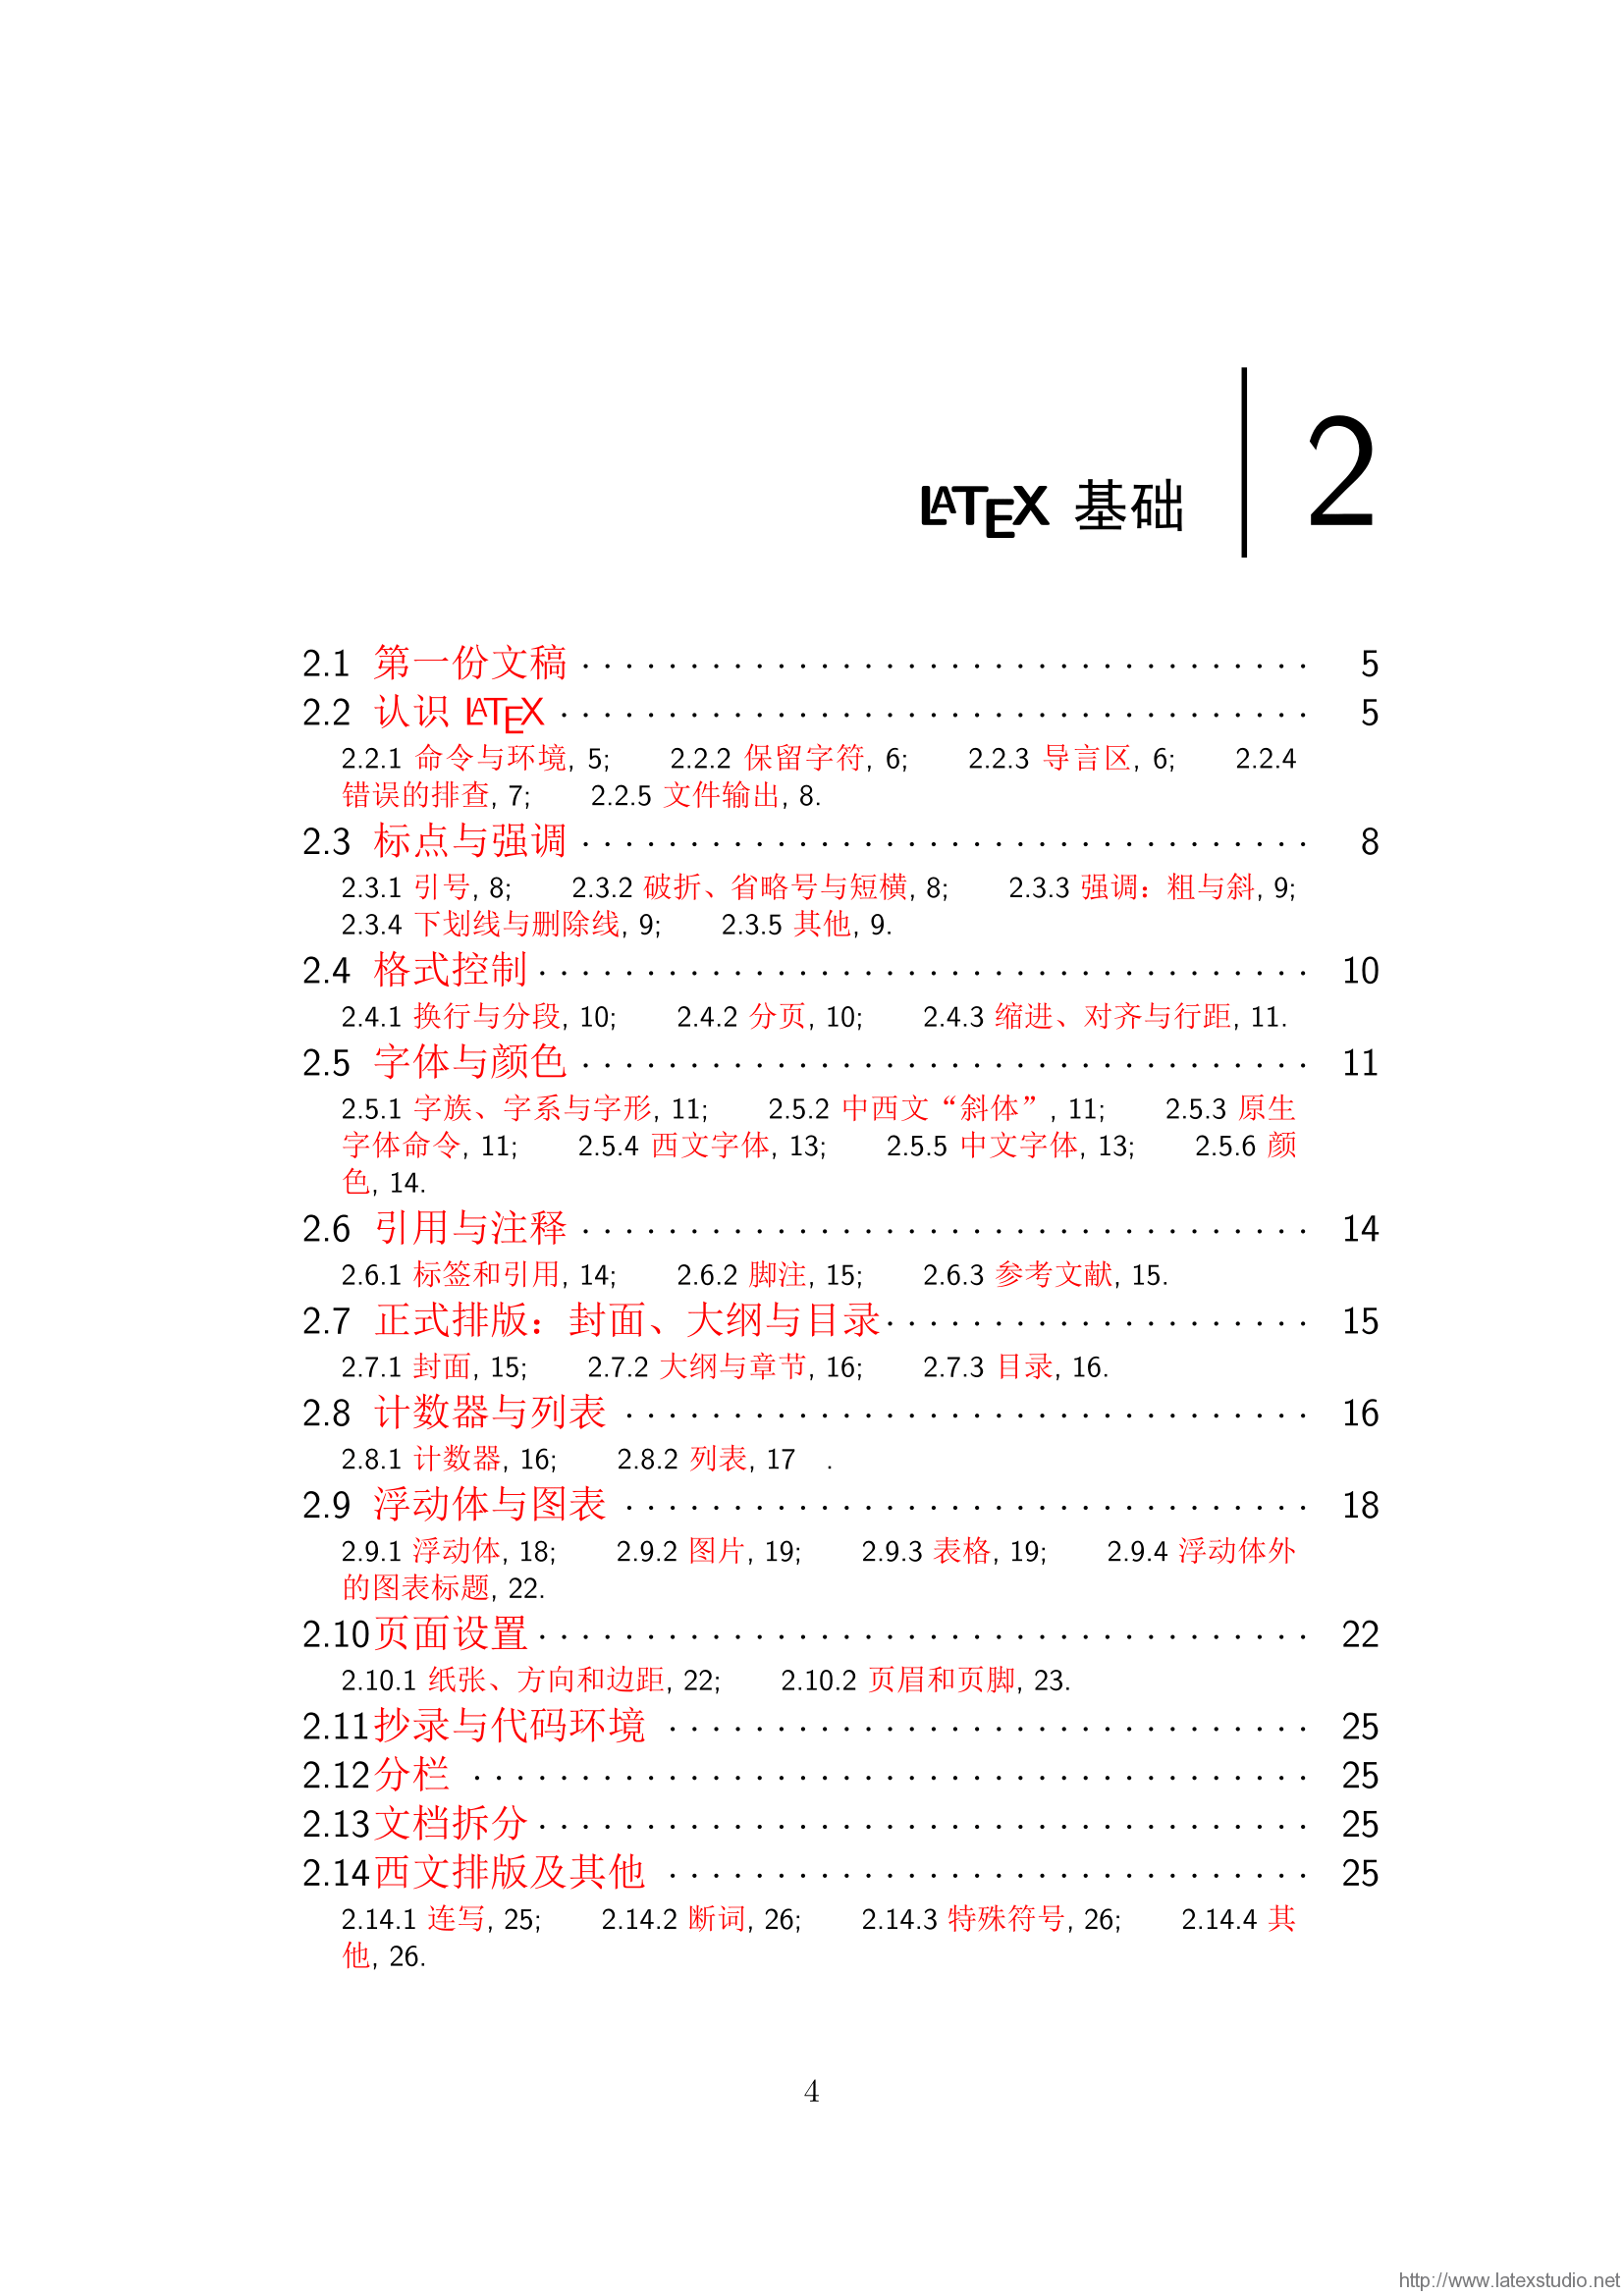 latex-cn-page-5